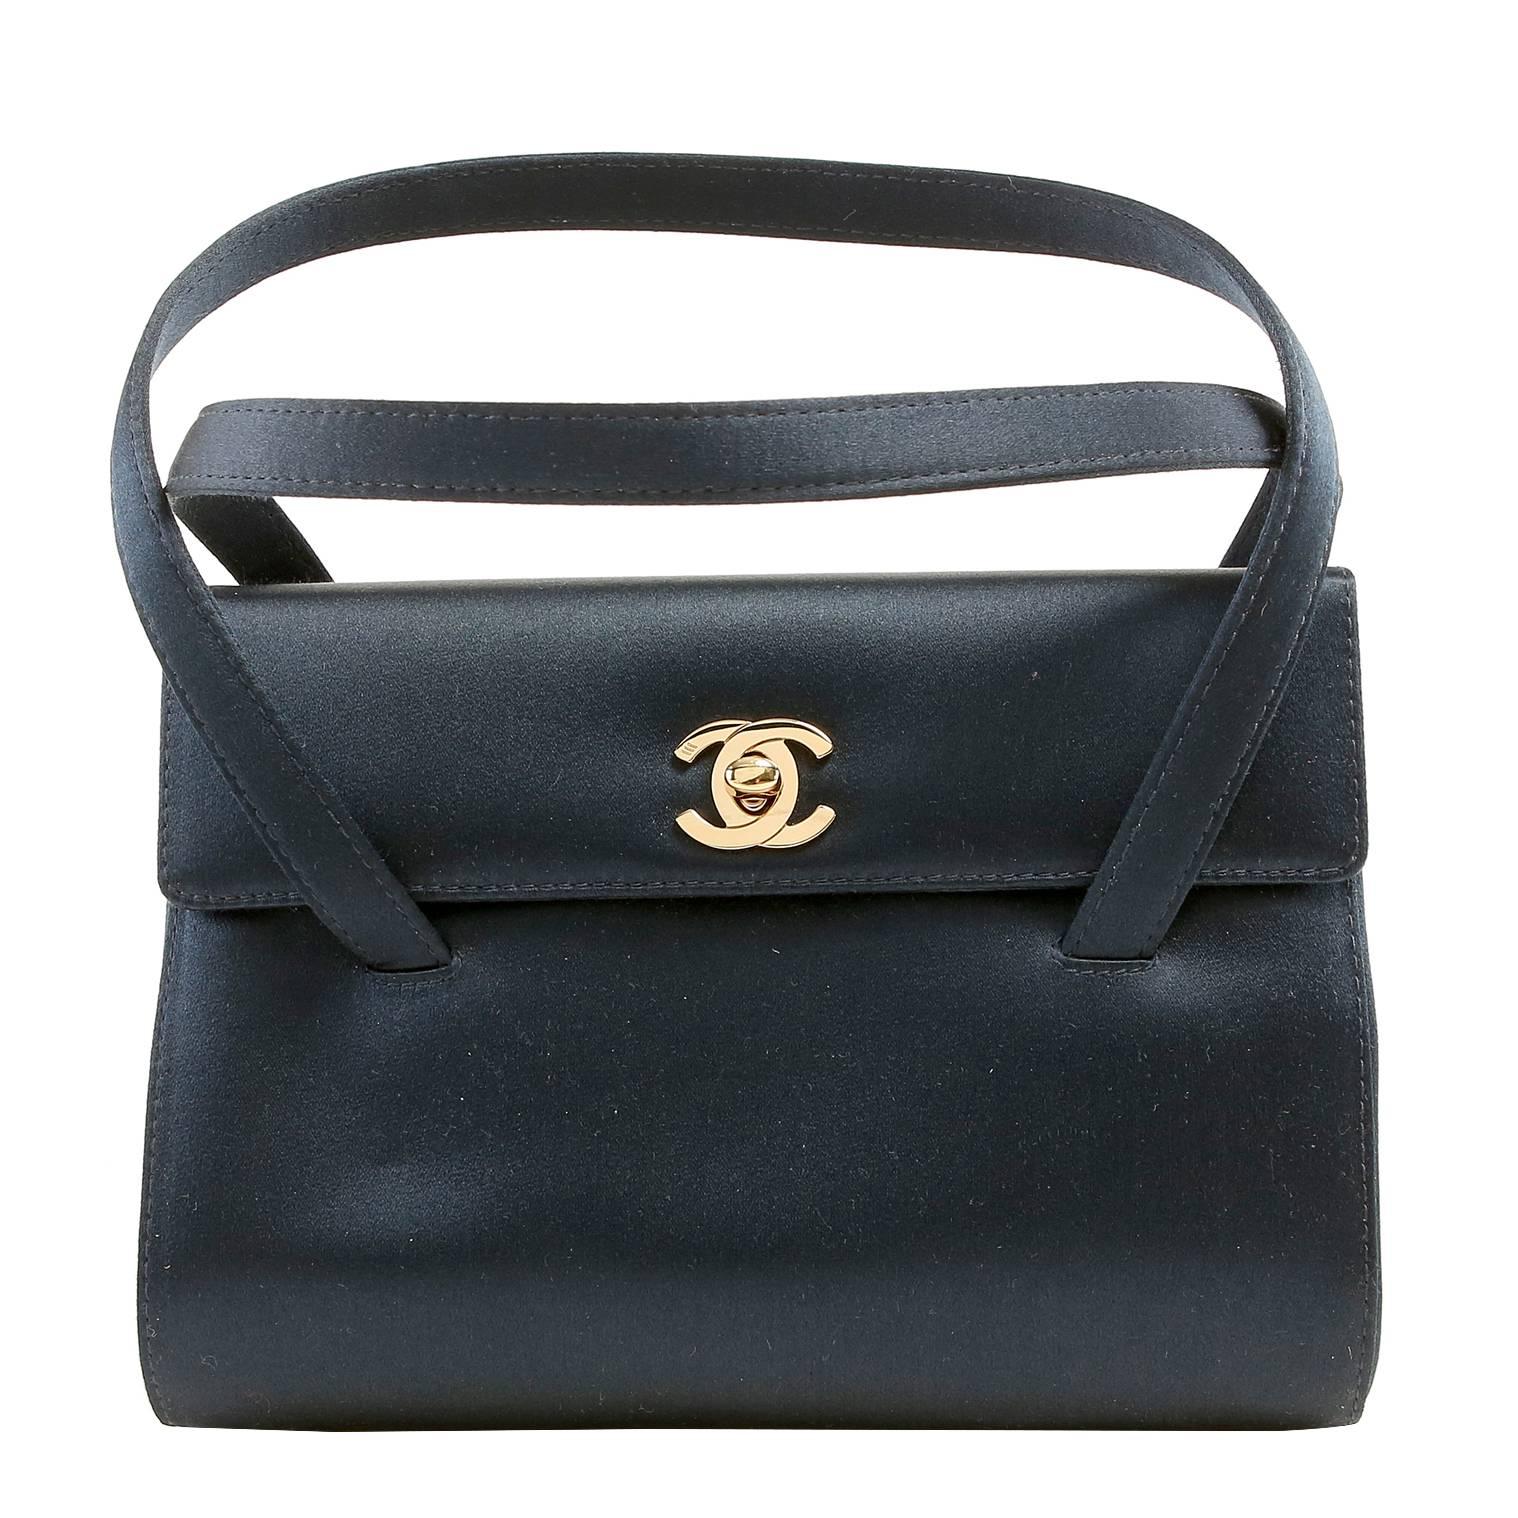 Chanel Navy Satin Evening Bag For Sale